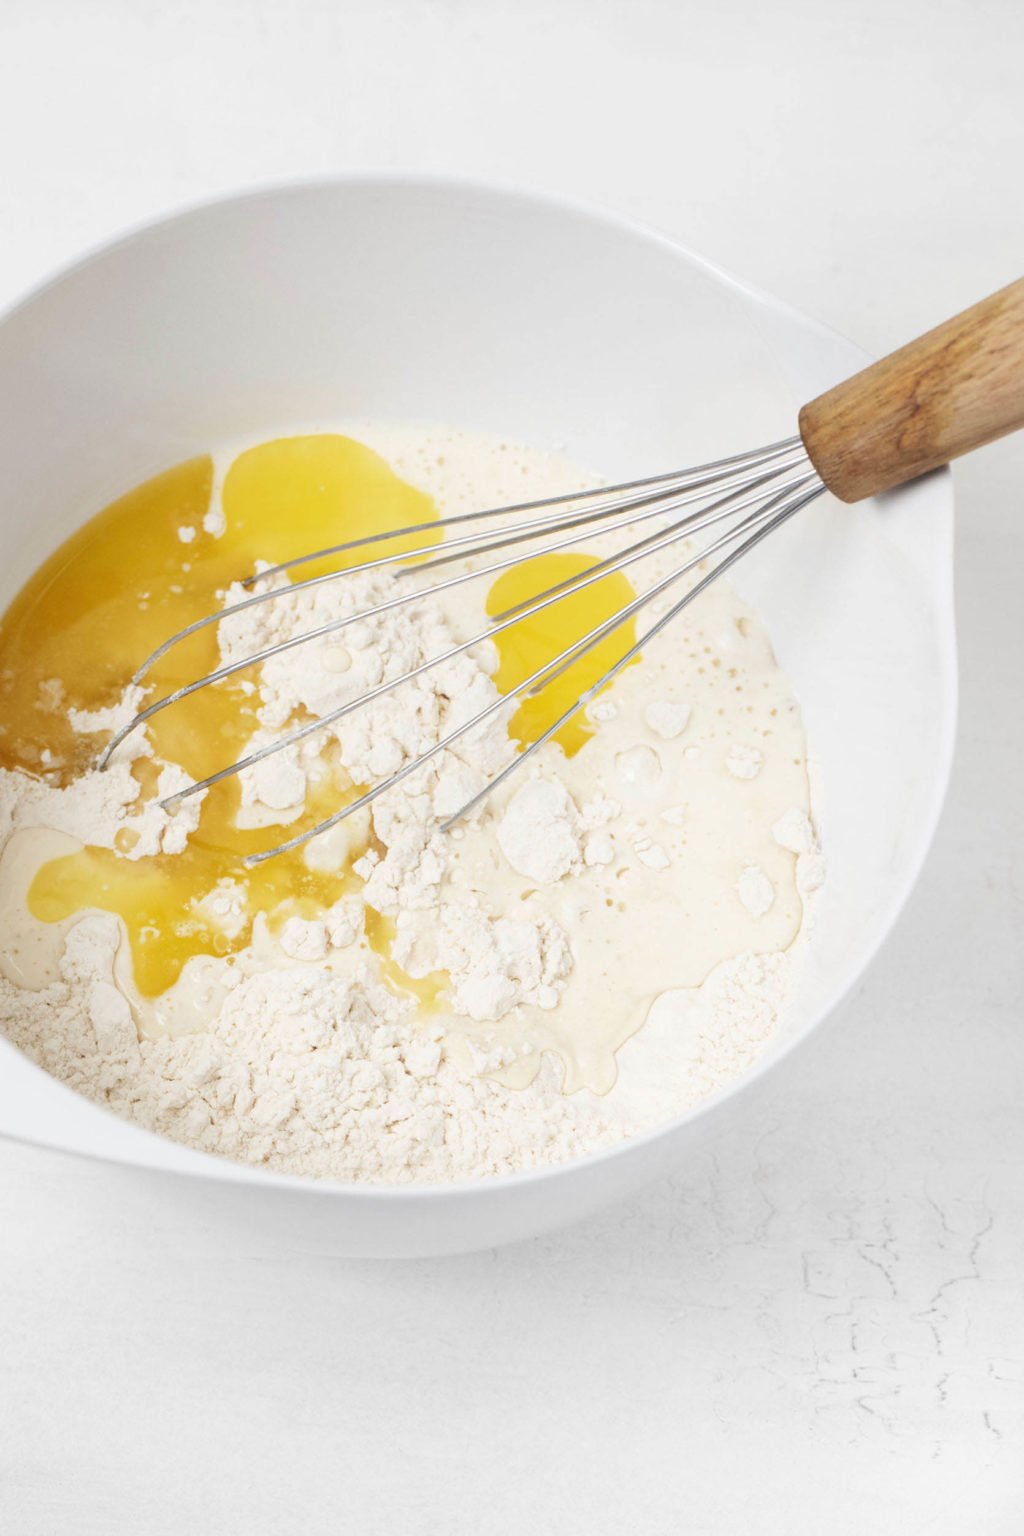 A mixing bowl contains flour, melted butter, and a whisk.